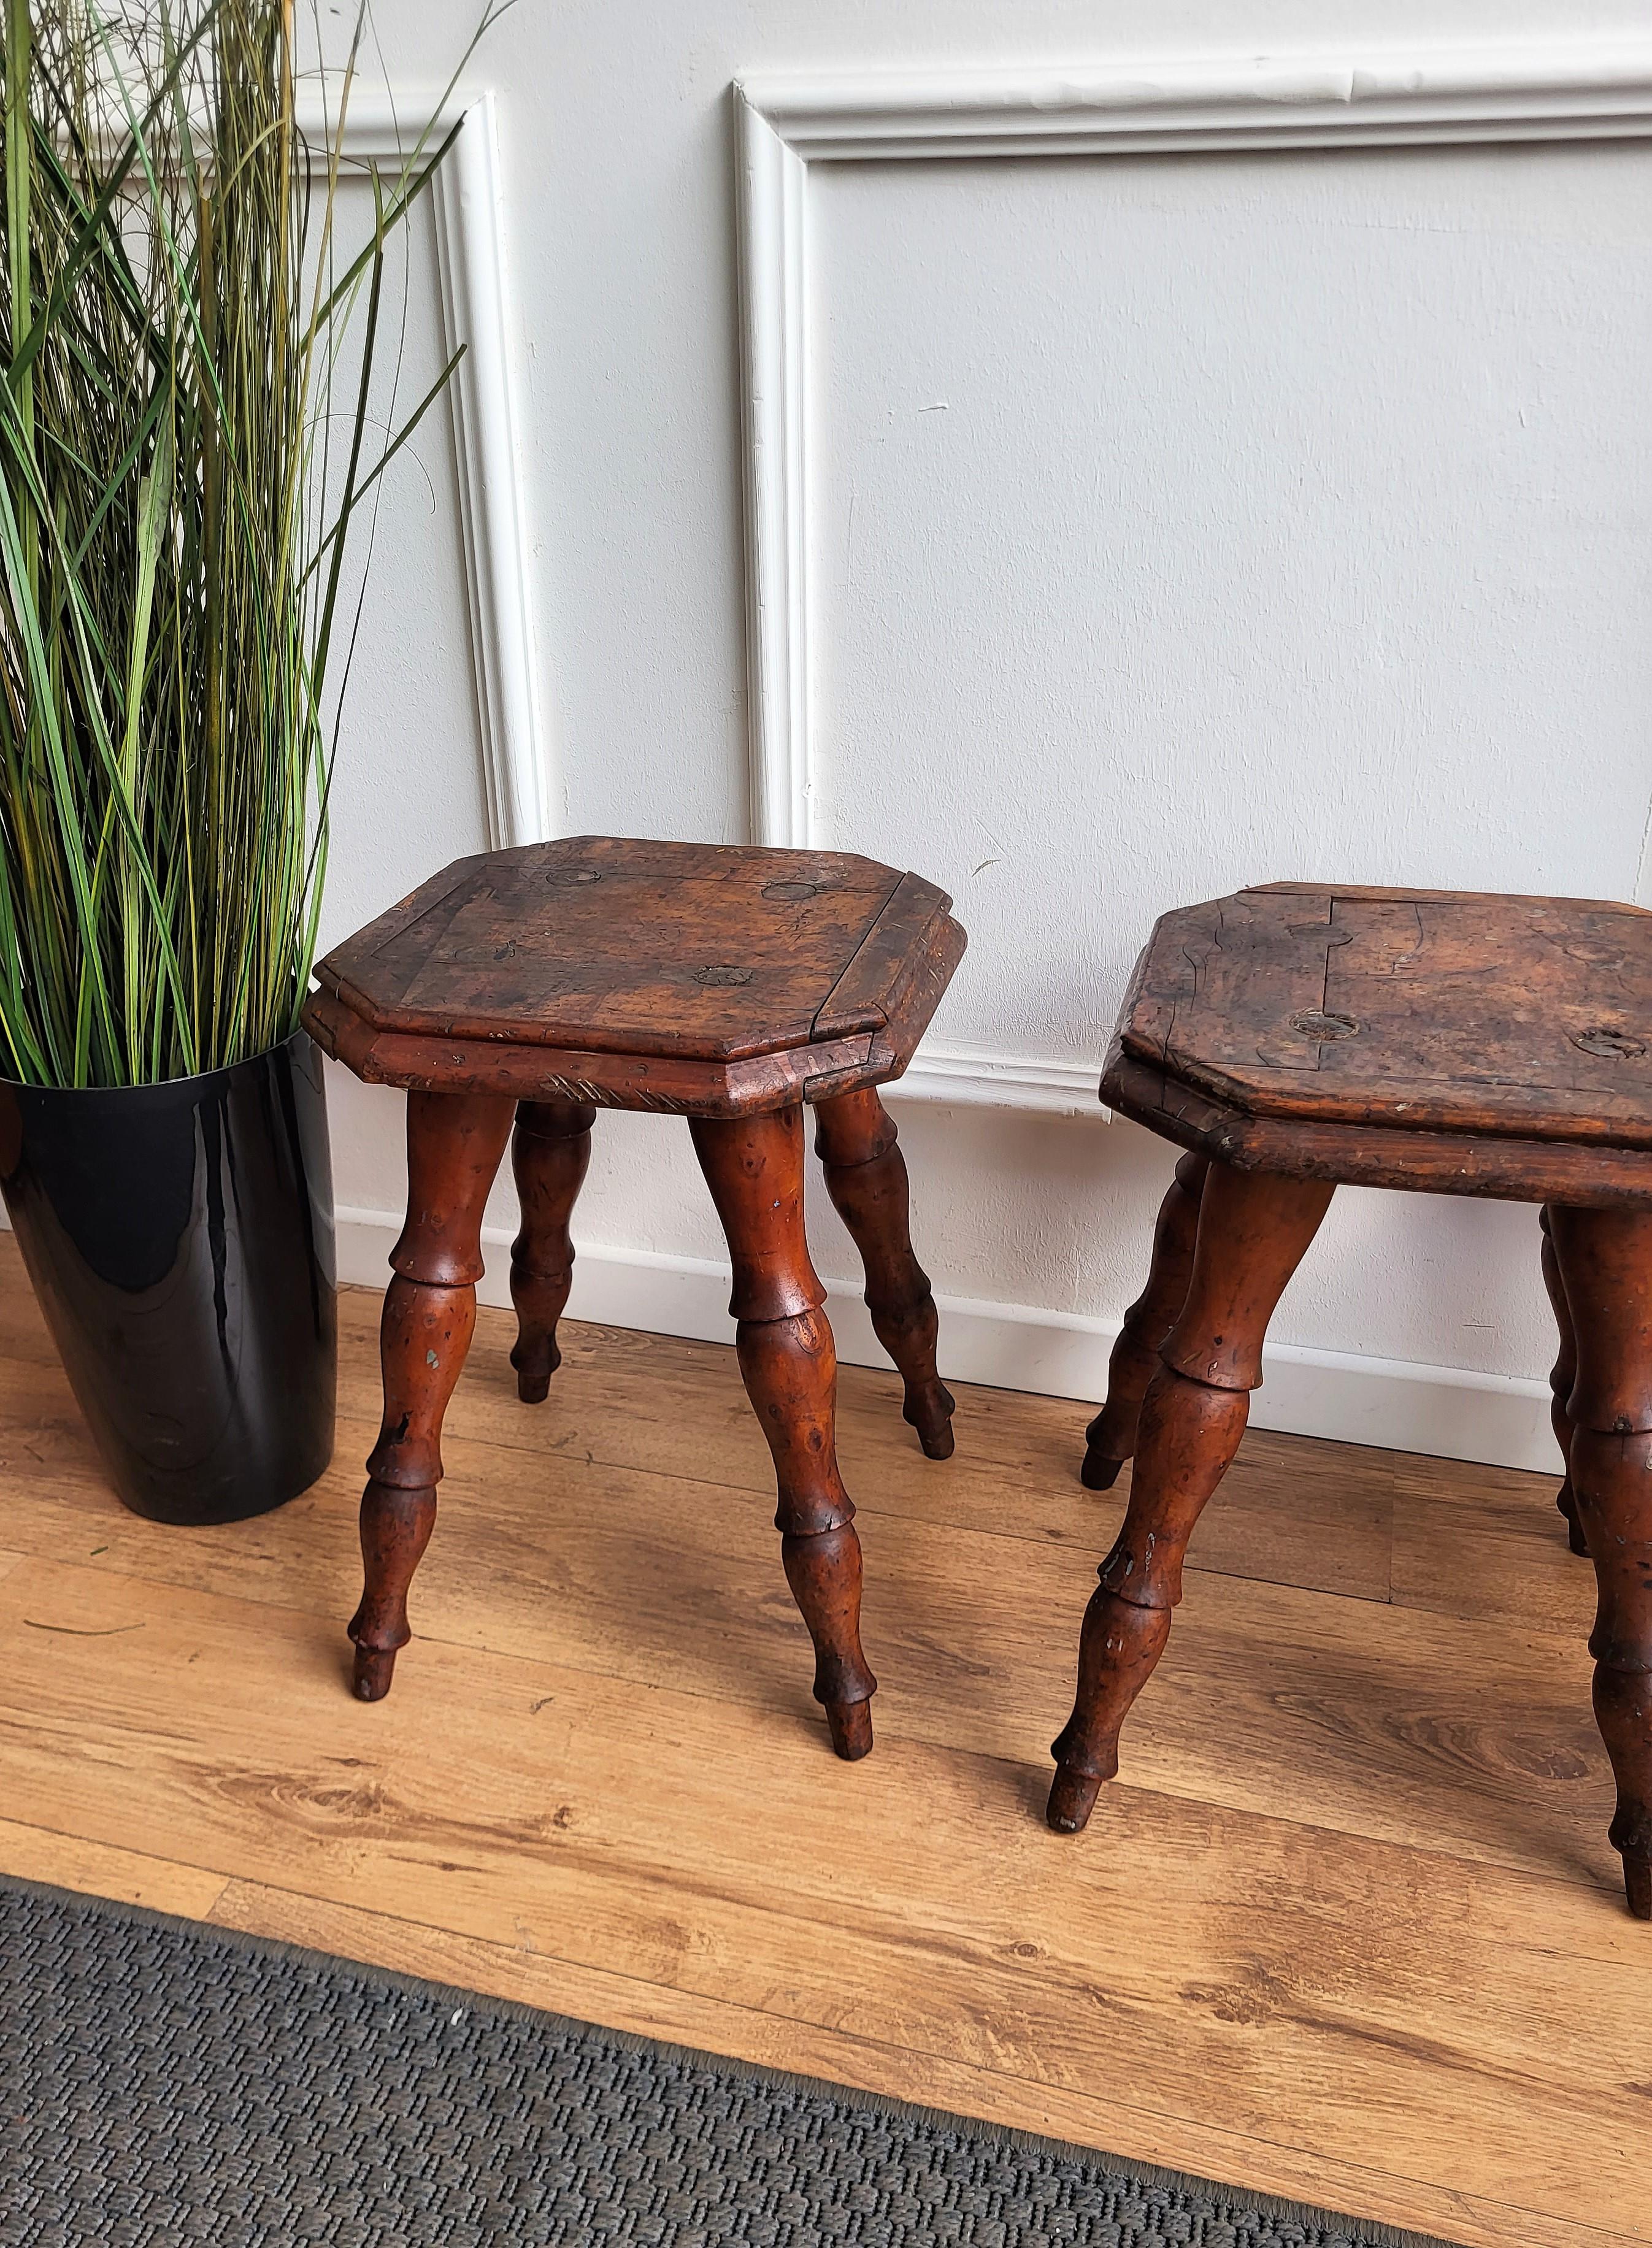 Set of 4 Antique Italian Walnut Side Tables or Stools with Carved Turned Legs In Fair Condition For Sale In Carimate, Como